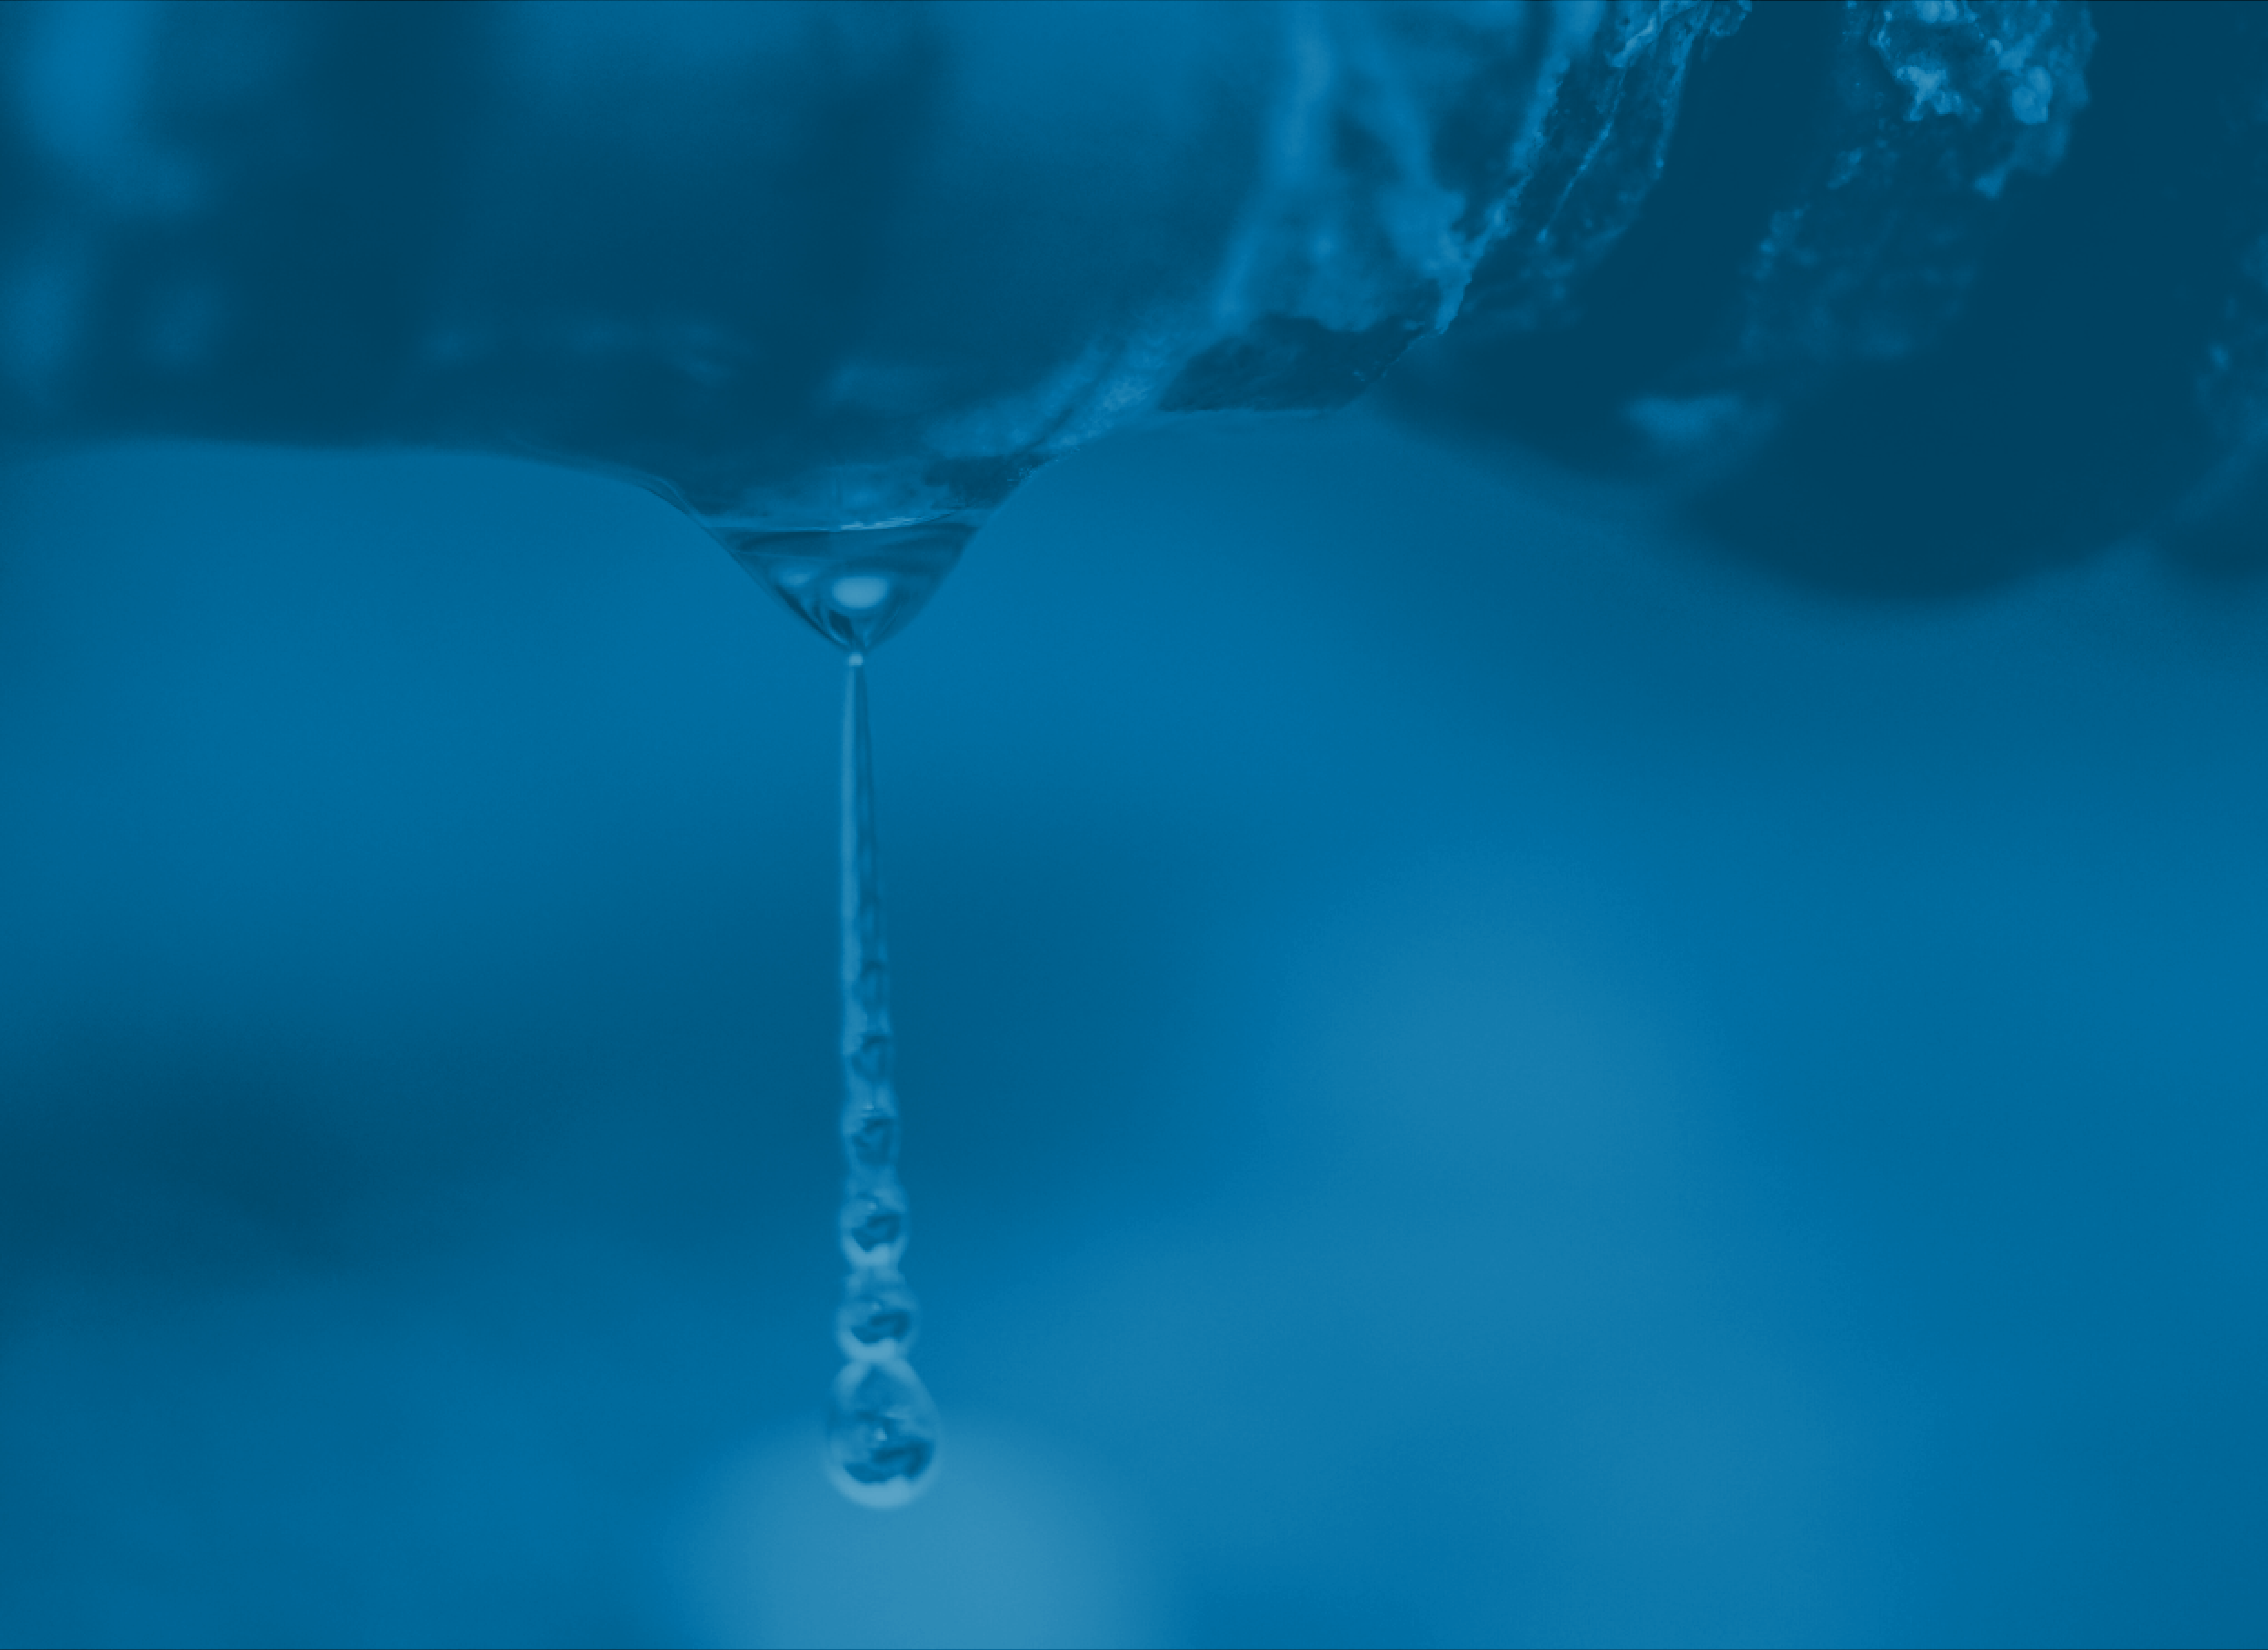 Button image showing water droplet leaking from pipe